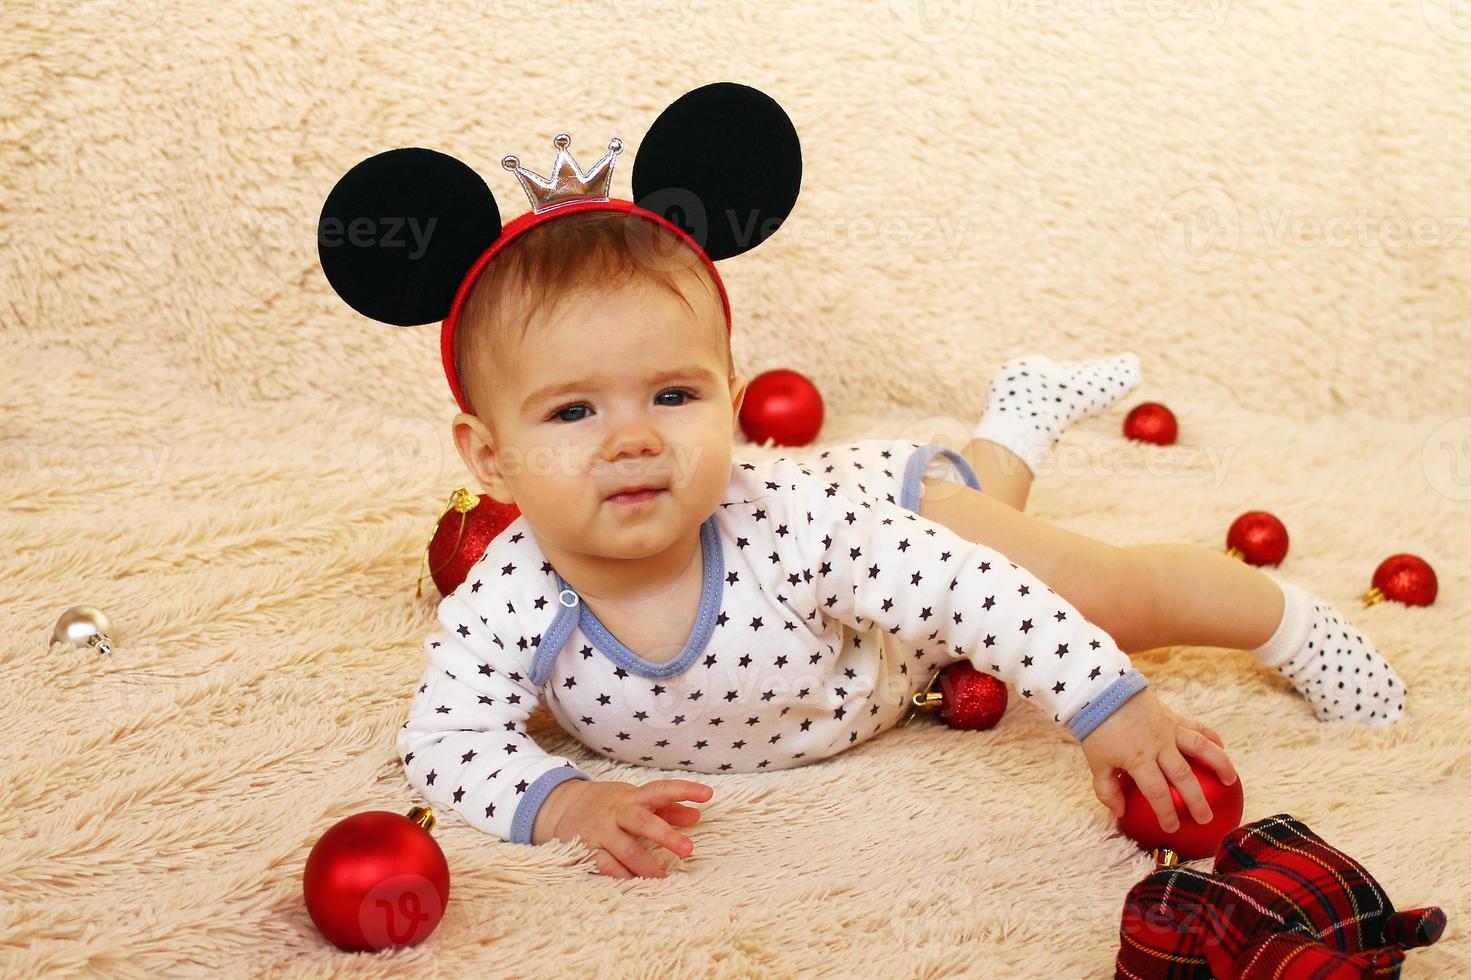 Cute little girl with mouse ears is lying on a beige plaid and playing with red Christmas decorations. photo